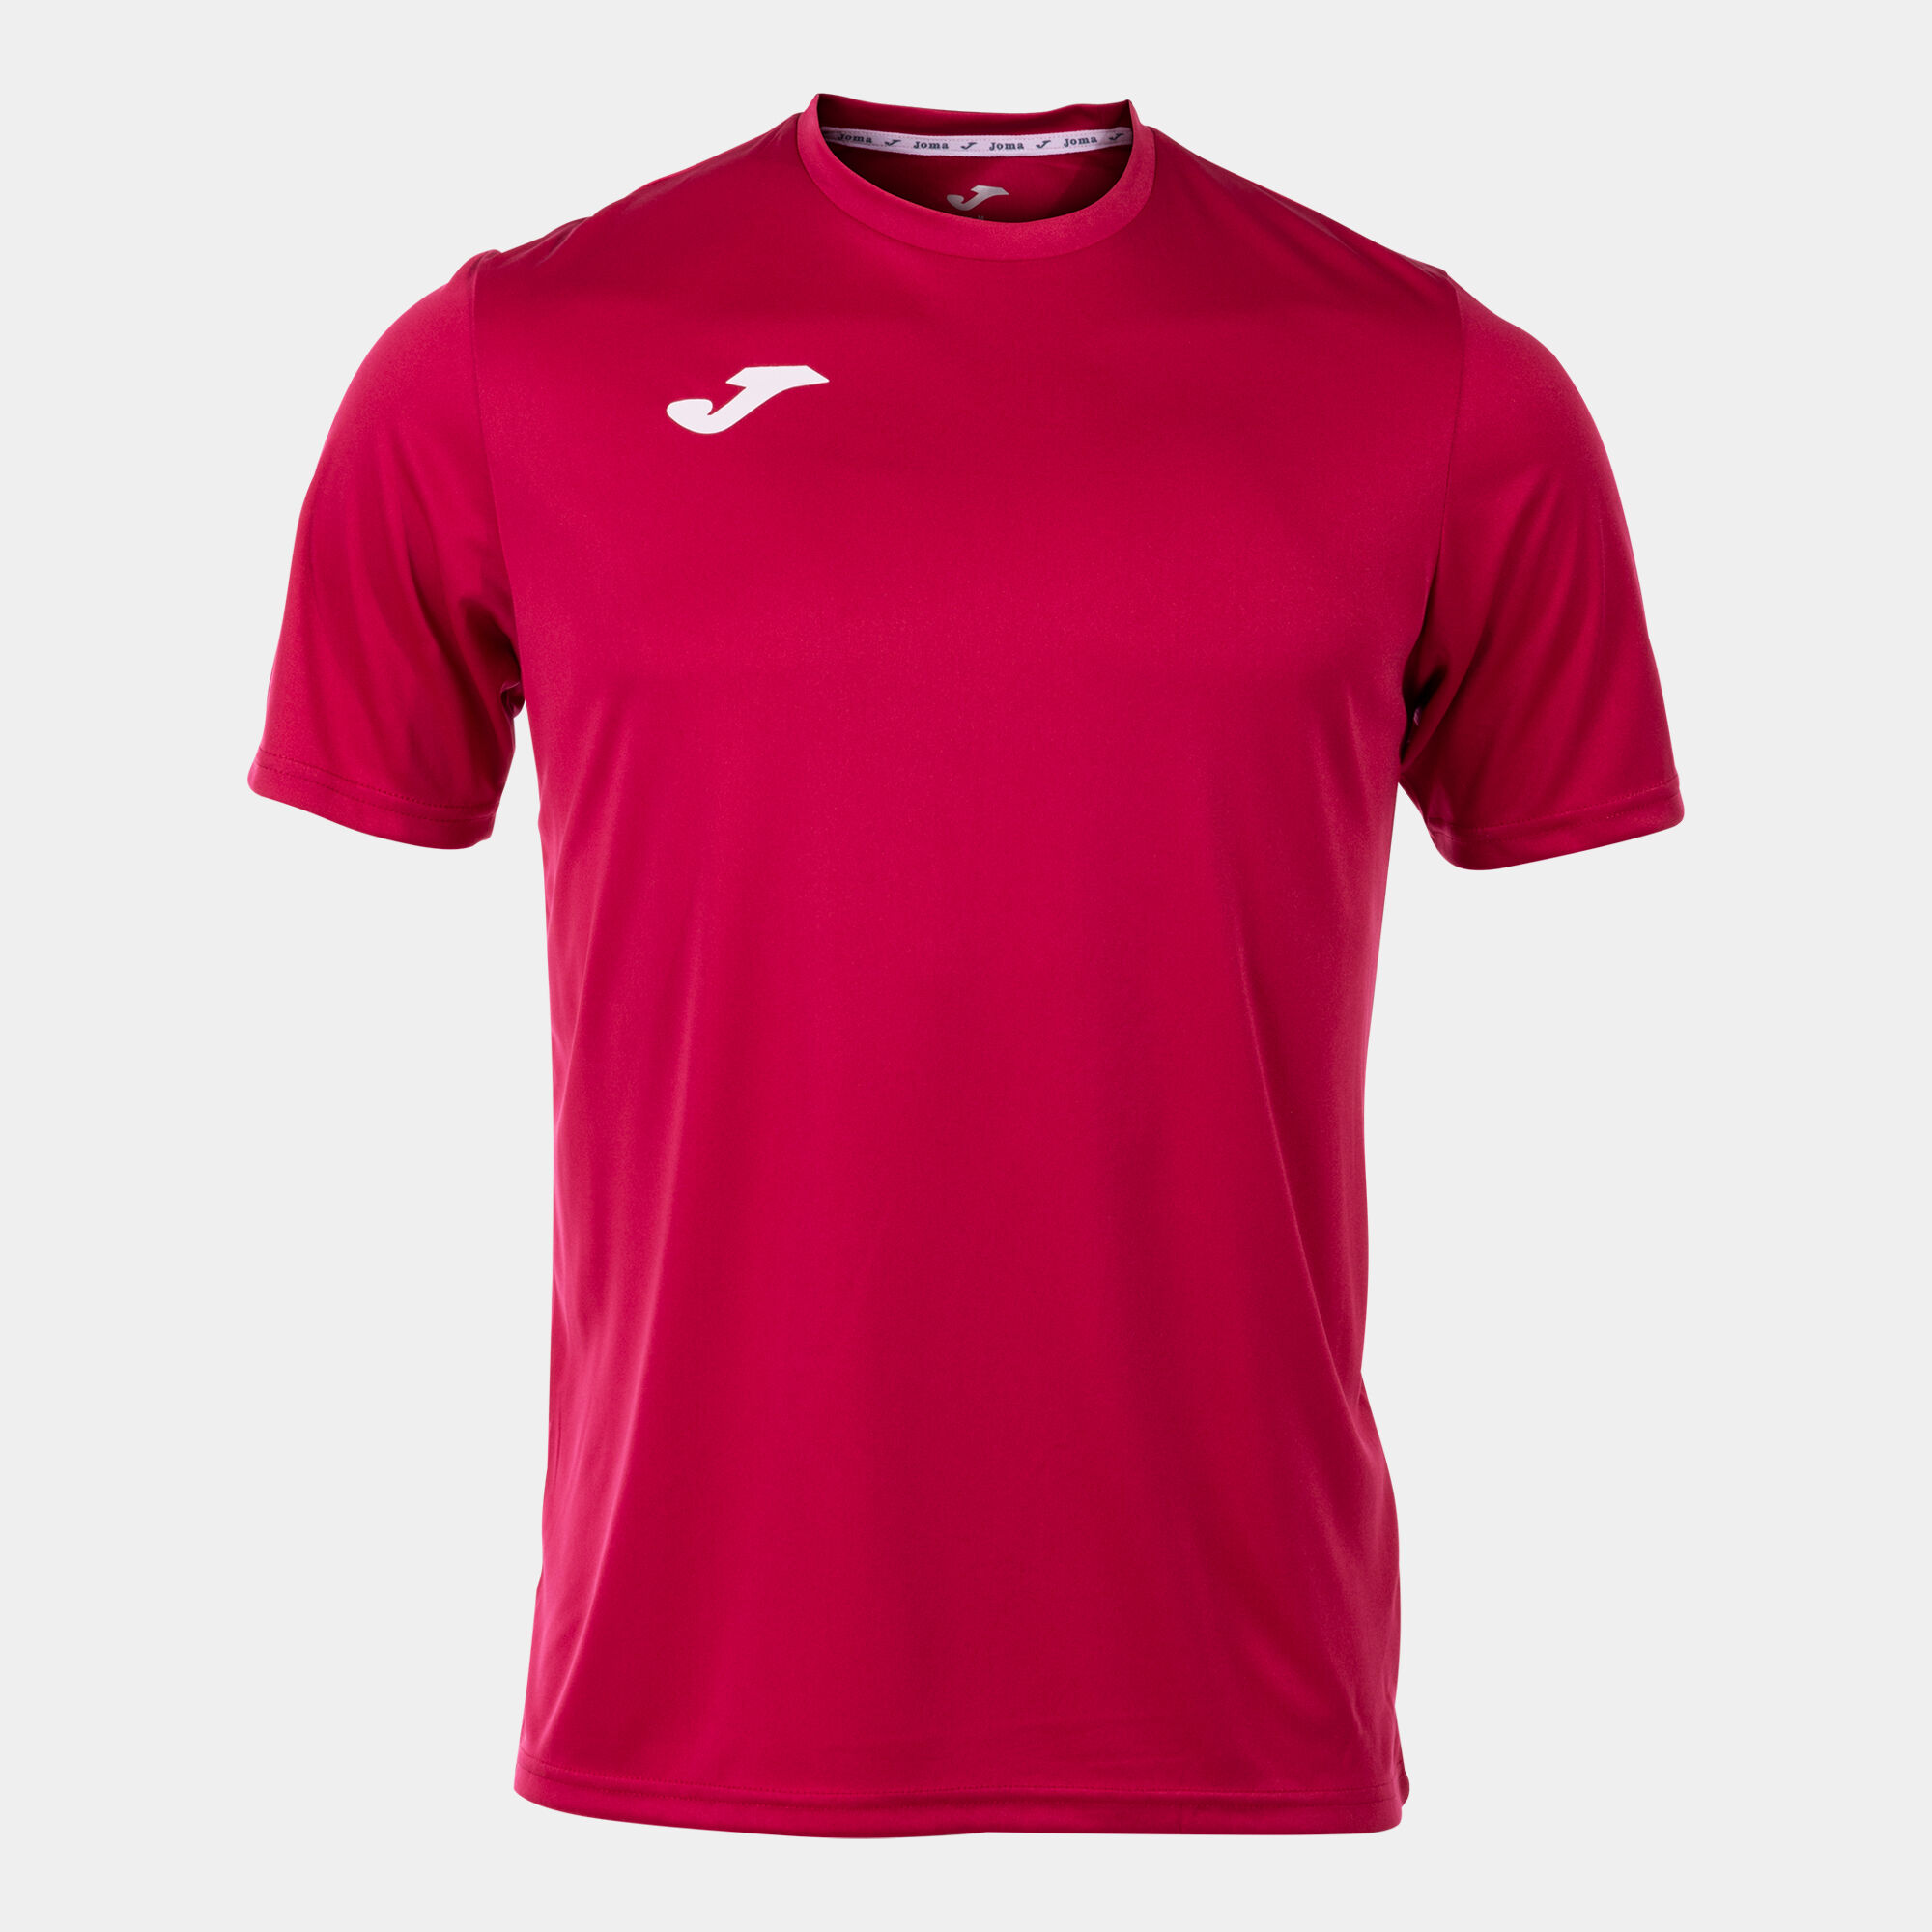 Maillot manches courtes homme Combi fuchsia